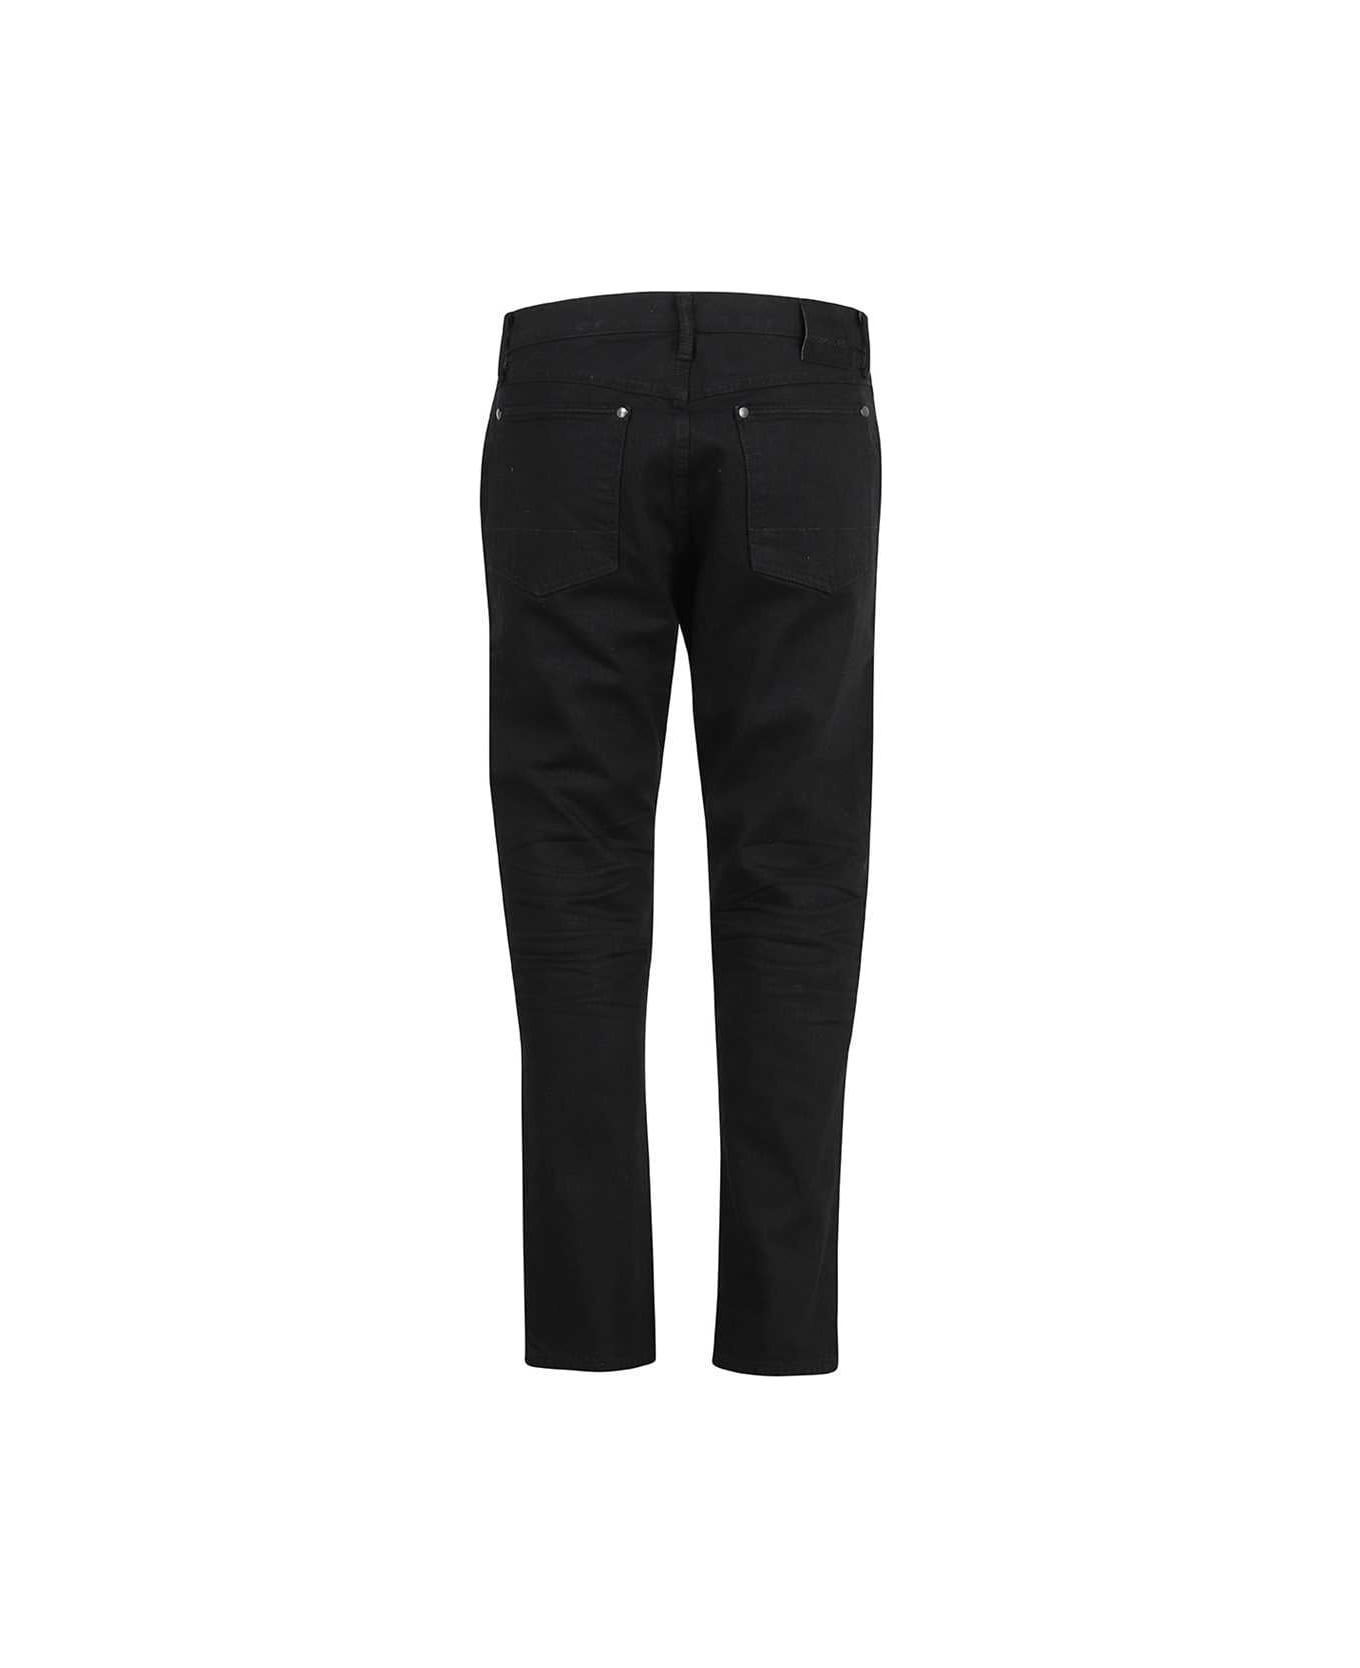 Tom Ford Tapered Fit Jeans - black ボトムス